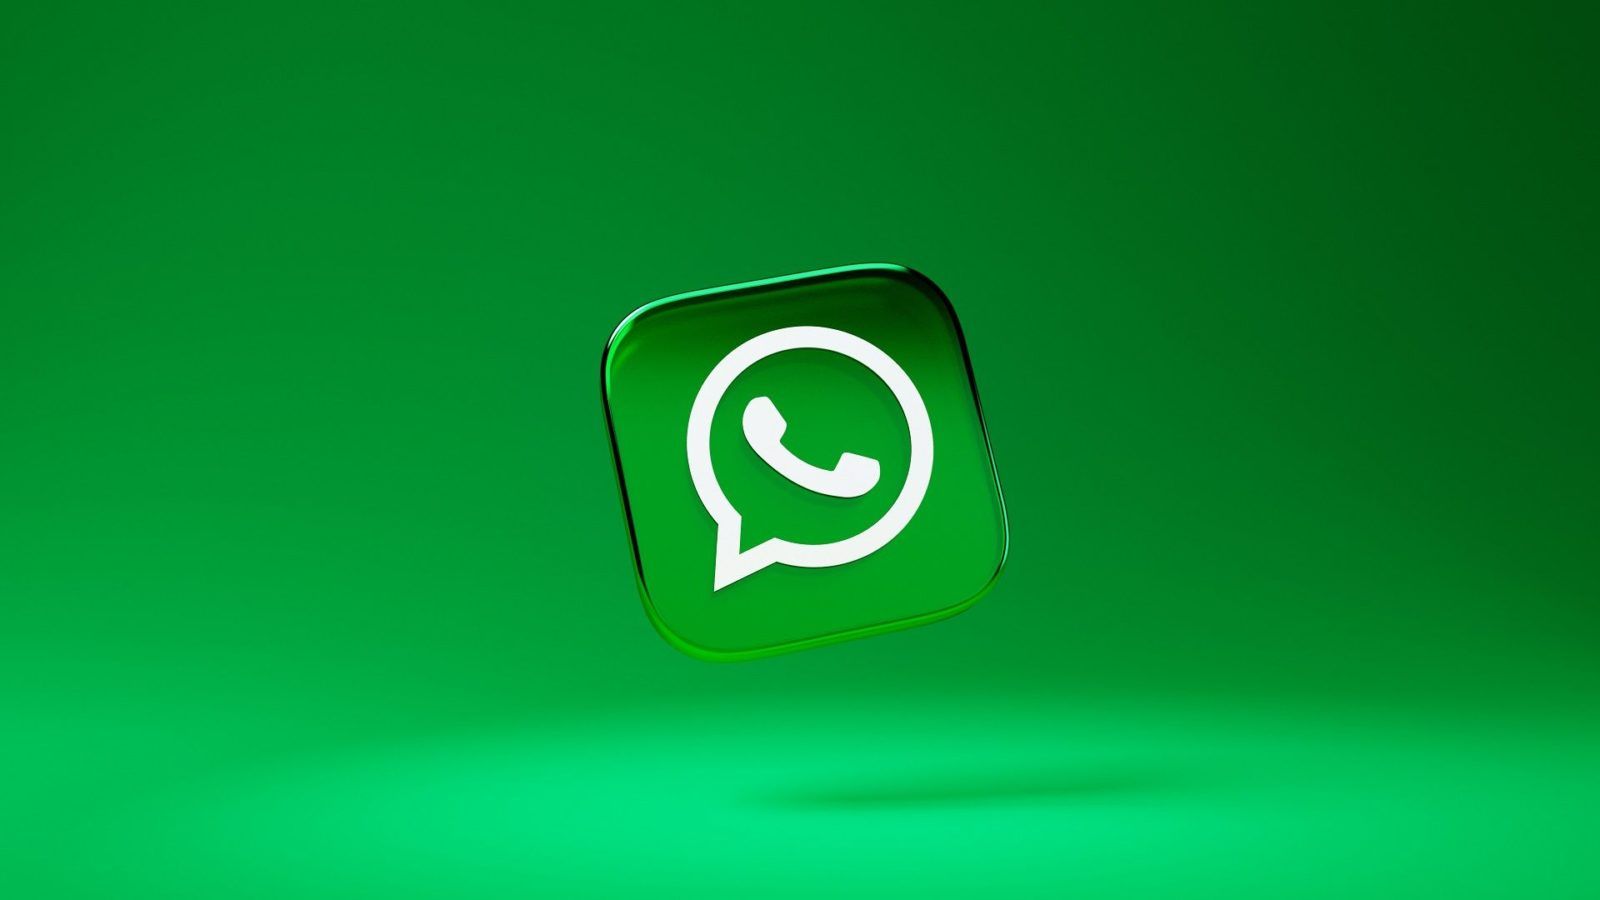 WhatsApp rolls out the Reactions feature for all users